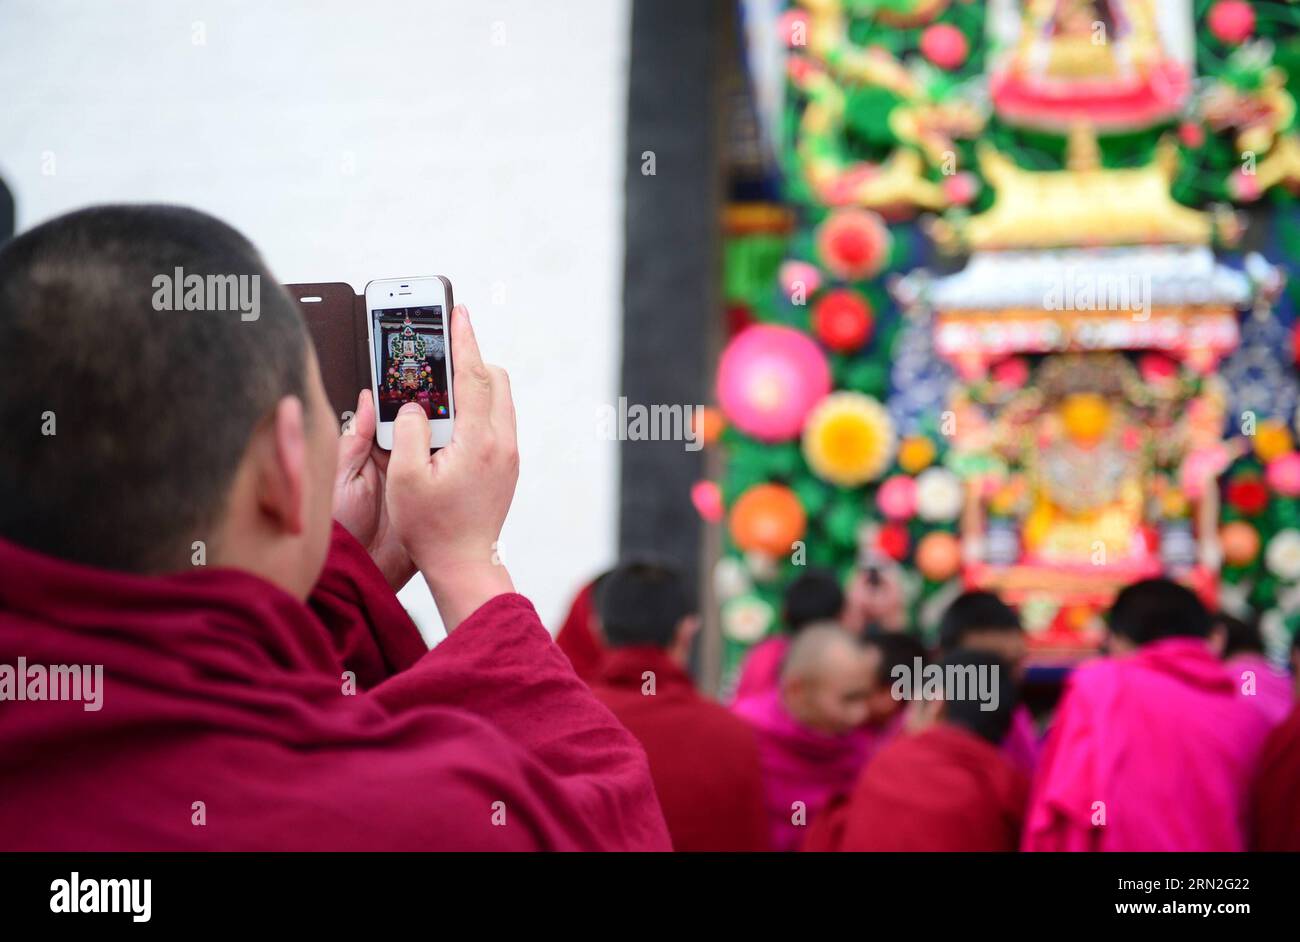 (150305) -- XIAHE, March 5, 2015 -- A monk take pictures of ghee flower artworks at Labrang Monastery in Xiahe, northwest China s Gansu Province, March 5, 2015. Ghee flower exhibitions are held in Taer Monastery in Qinghai Province and Labrang Monastery in Gansu Province, both presitigious Tibetan Buddhist monasteries, to celebrate the Lantern Festival on March 5. ) (zkr) CHINA-QINGHAI-GANSU-GHEE FLOWER-EXHIBITIONS (CN) FanxPeikun PUBLICATIONxNOTxINxCHN   Xiahe March 5 2015 a Monk Take Pictures of Ghee Flower Artworks AT Labrang monastery in Xiahe Northwest China S Gansu Province March 5 2015 Stock Photo